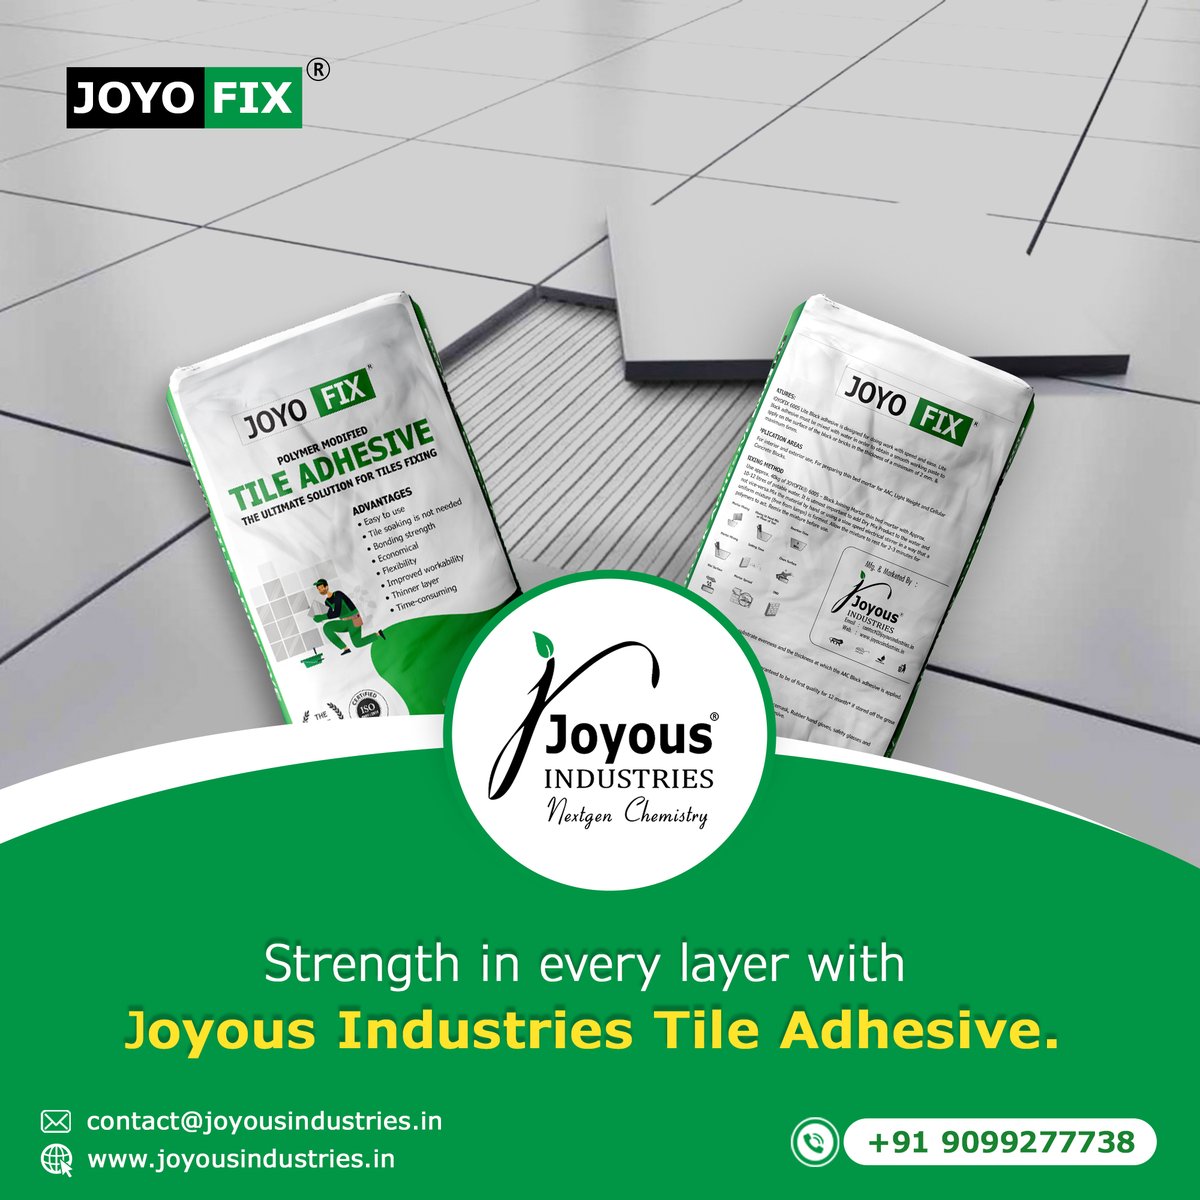 Experience strength with Joyous Industries Tile Adhesive! 💪 Our durable, reliable adhesive ensures your tiles stay secure for years. Elevate your projects confidently with our quality solutions.

#JoyousIndustries #TileAdhesive #StrongBonds #DurableTiles #ReliableAdhesive